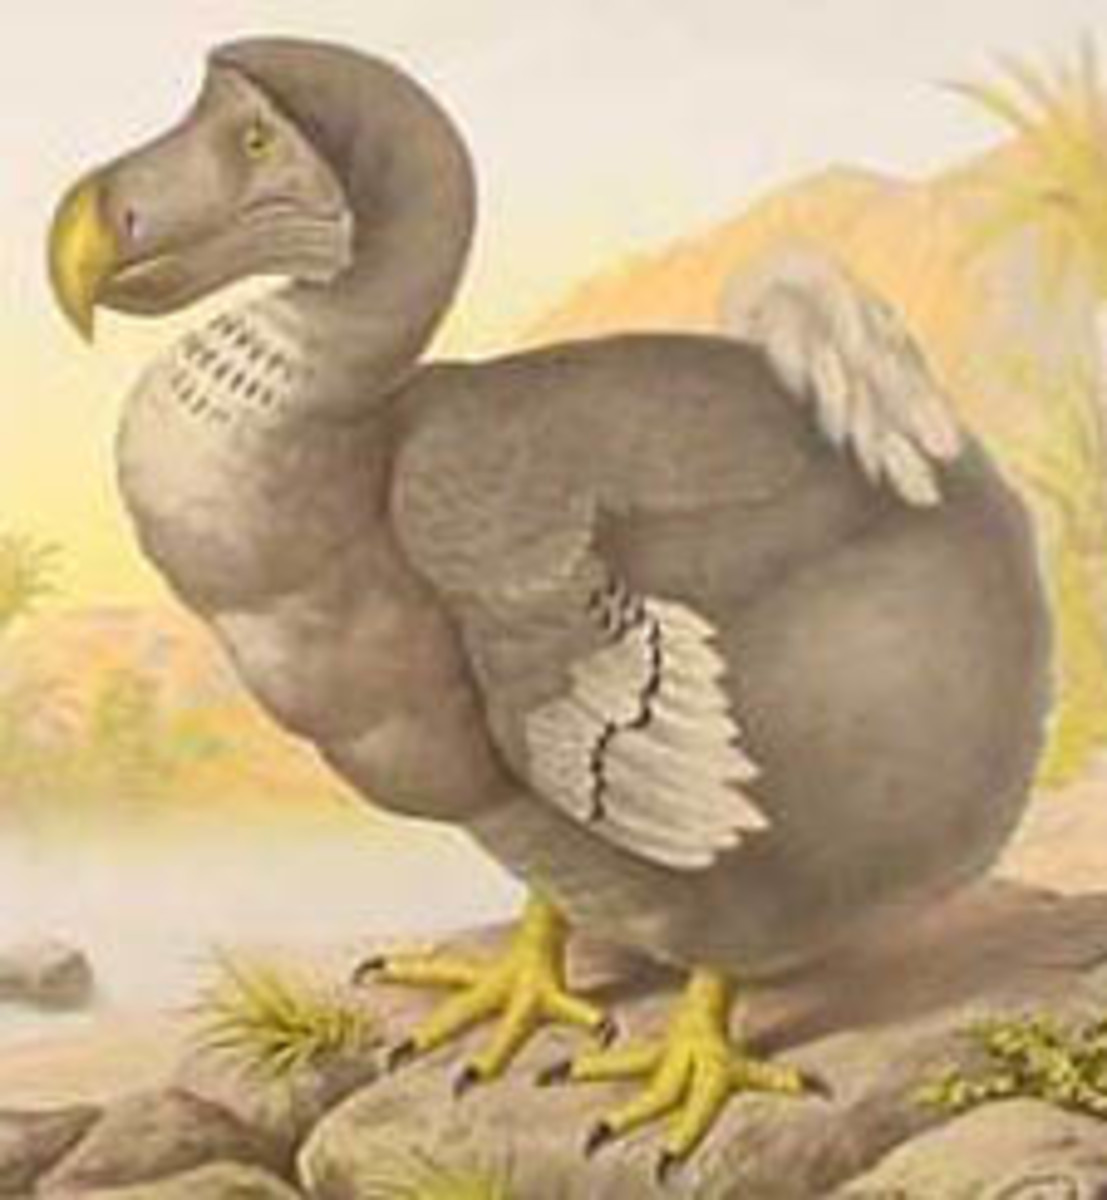 15 Extinct Bird Species & Possible Reasons for Their Extinction